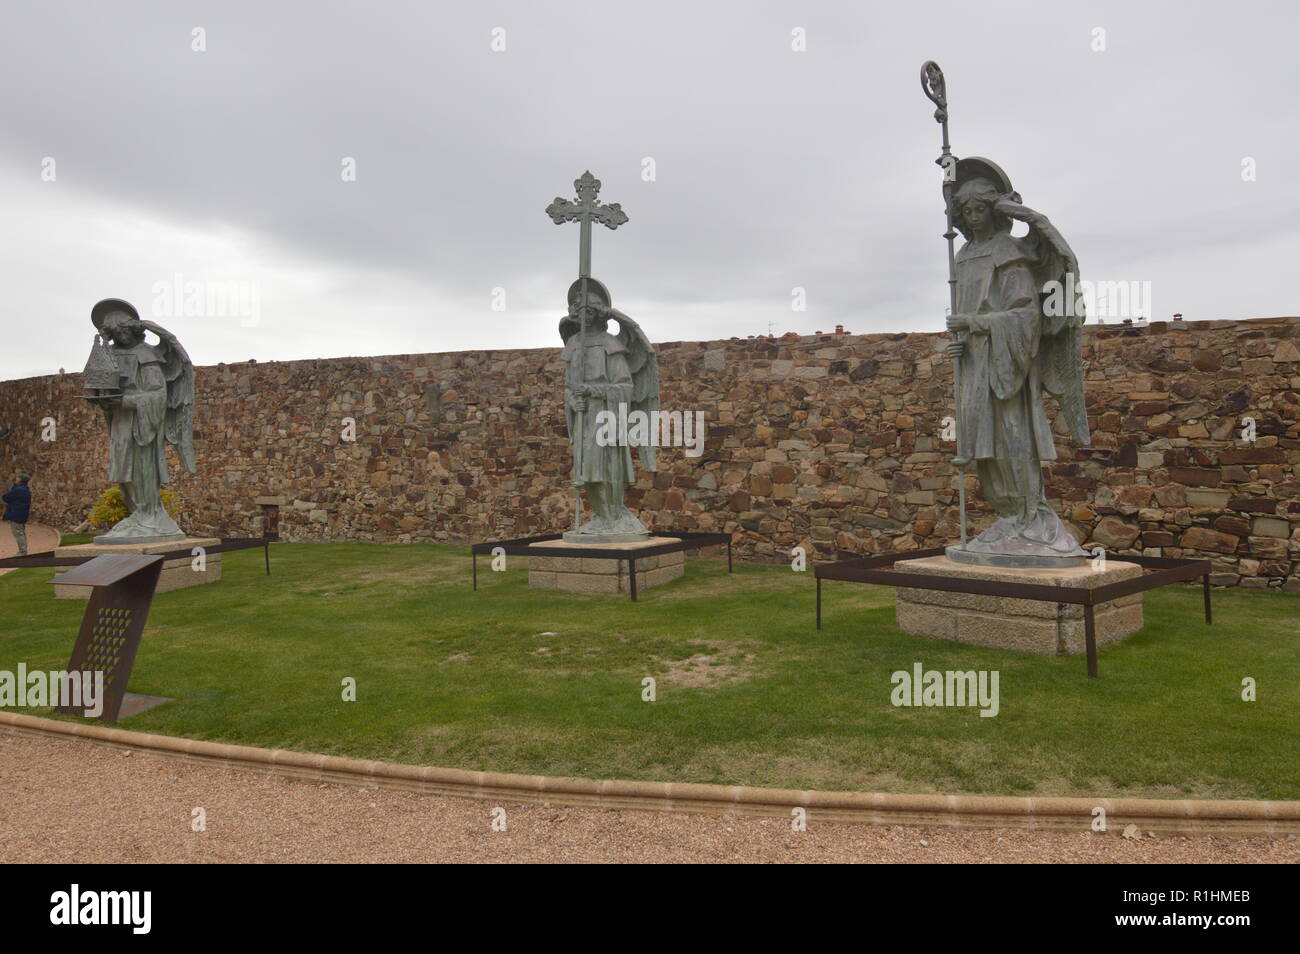 Statues Of Angels In The Gardens Of The Episcopal Palace Of Gaudi In Astorga. Architecture, History, Camino De Santiago, Travel, Street Photography. N Stock Photo